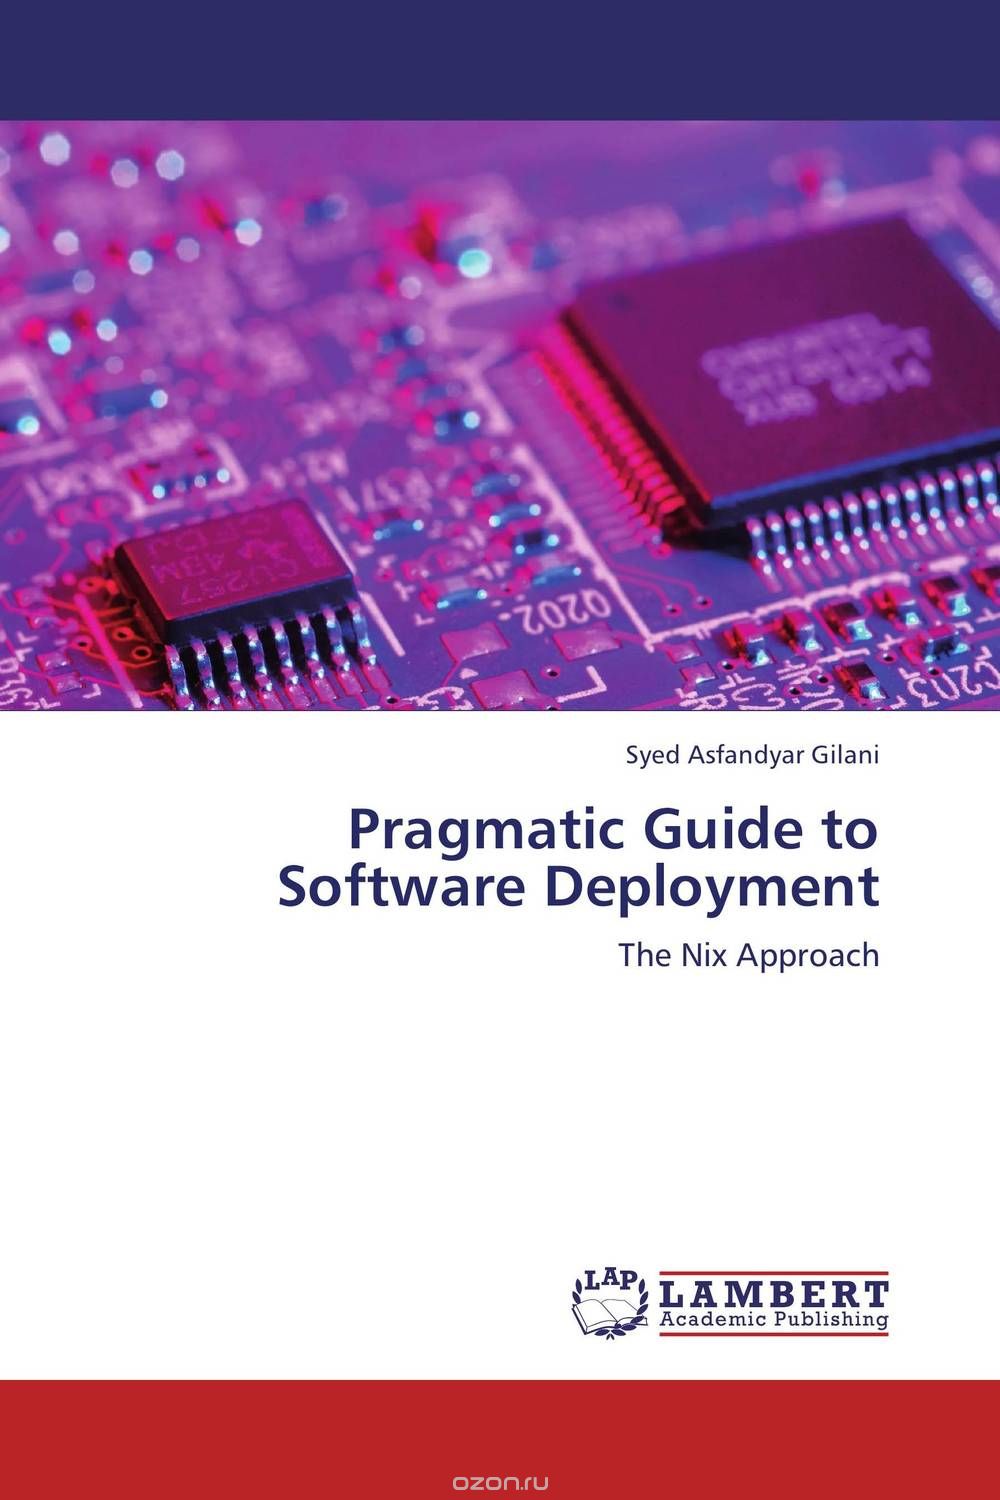 Pragmatic Guide to Software Deployment